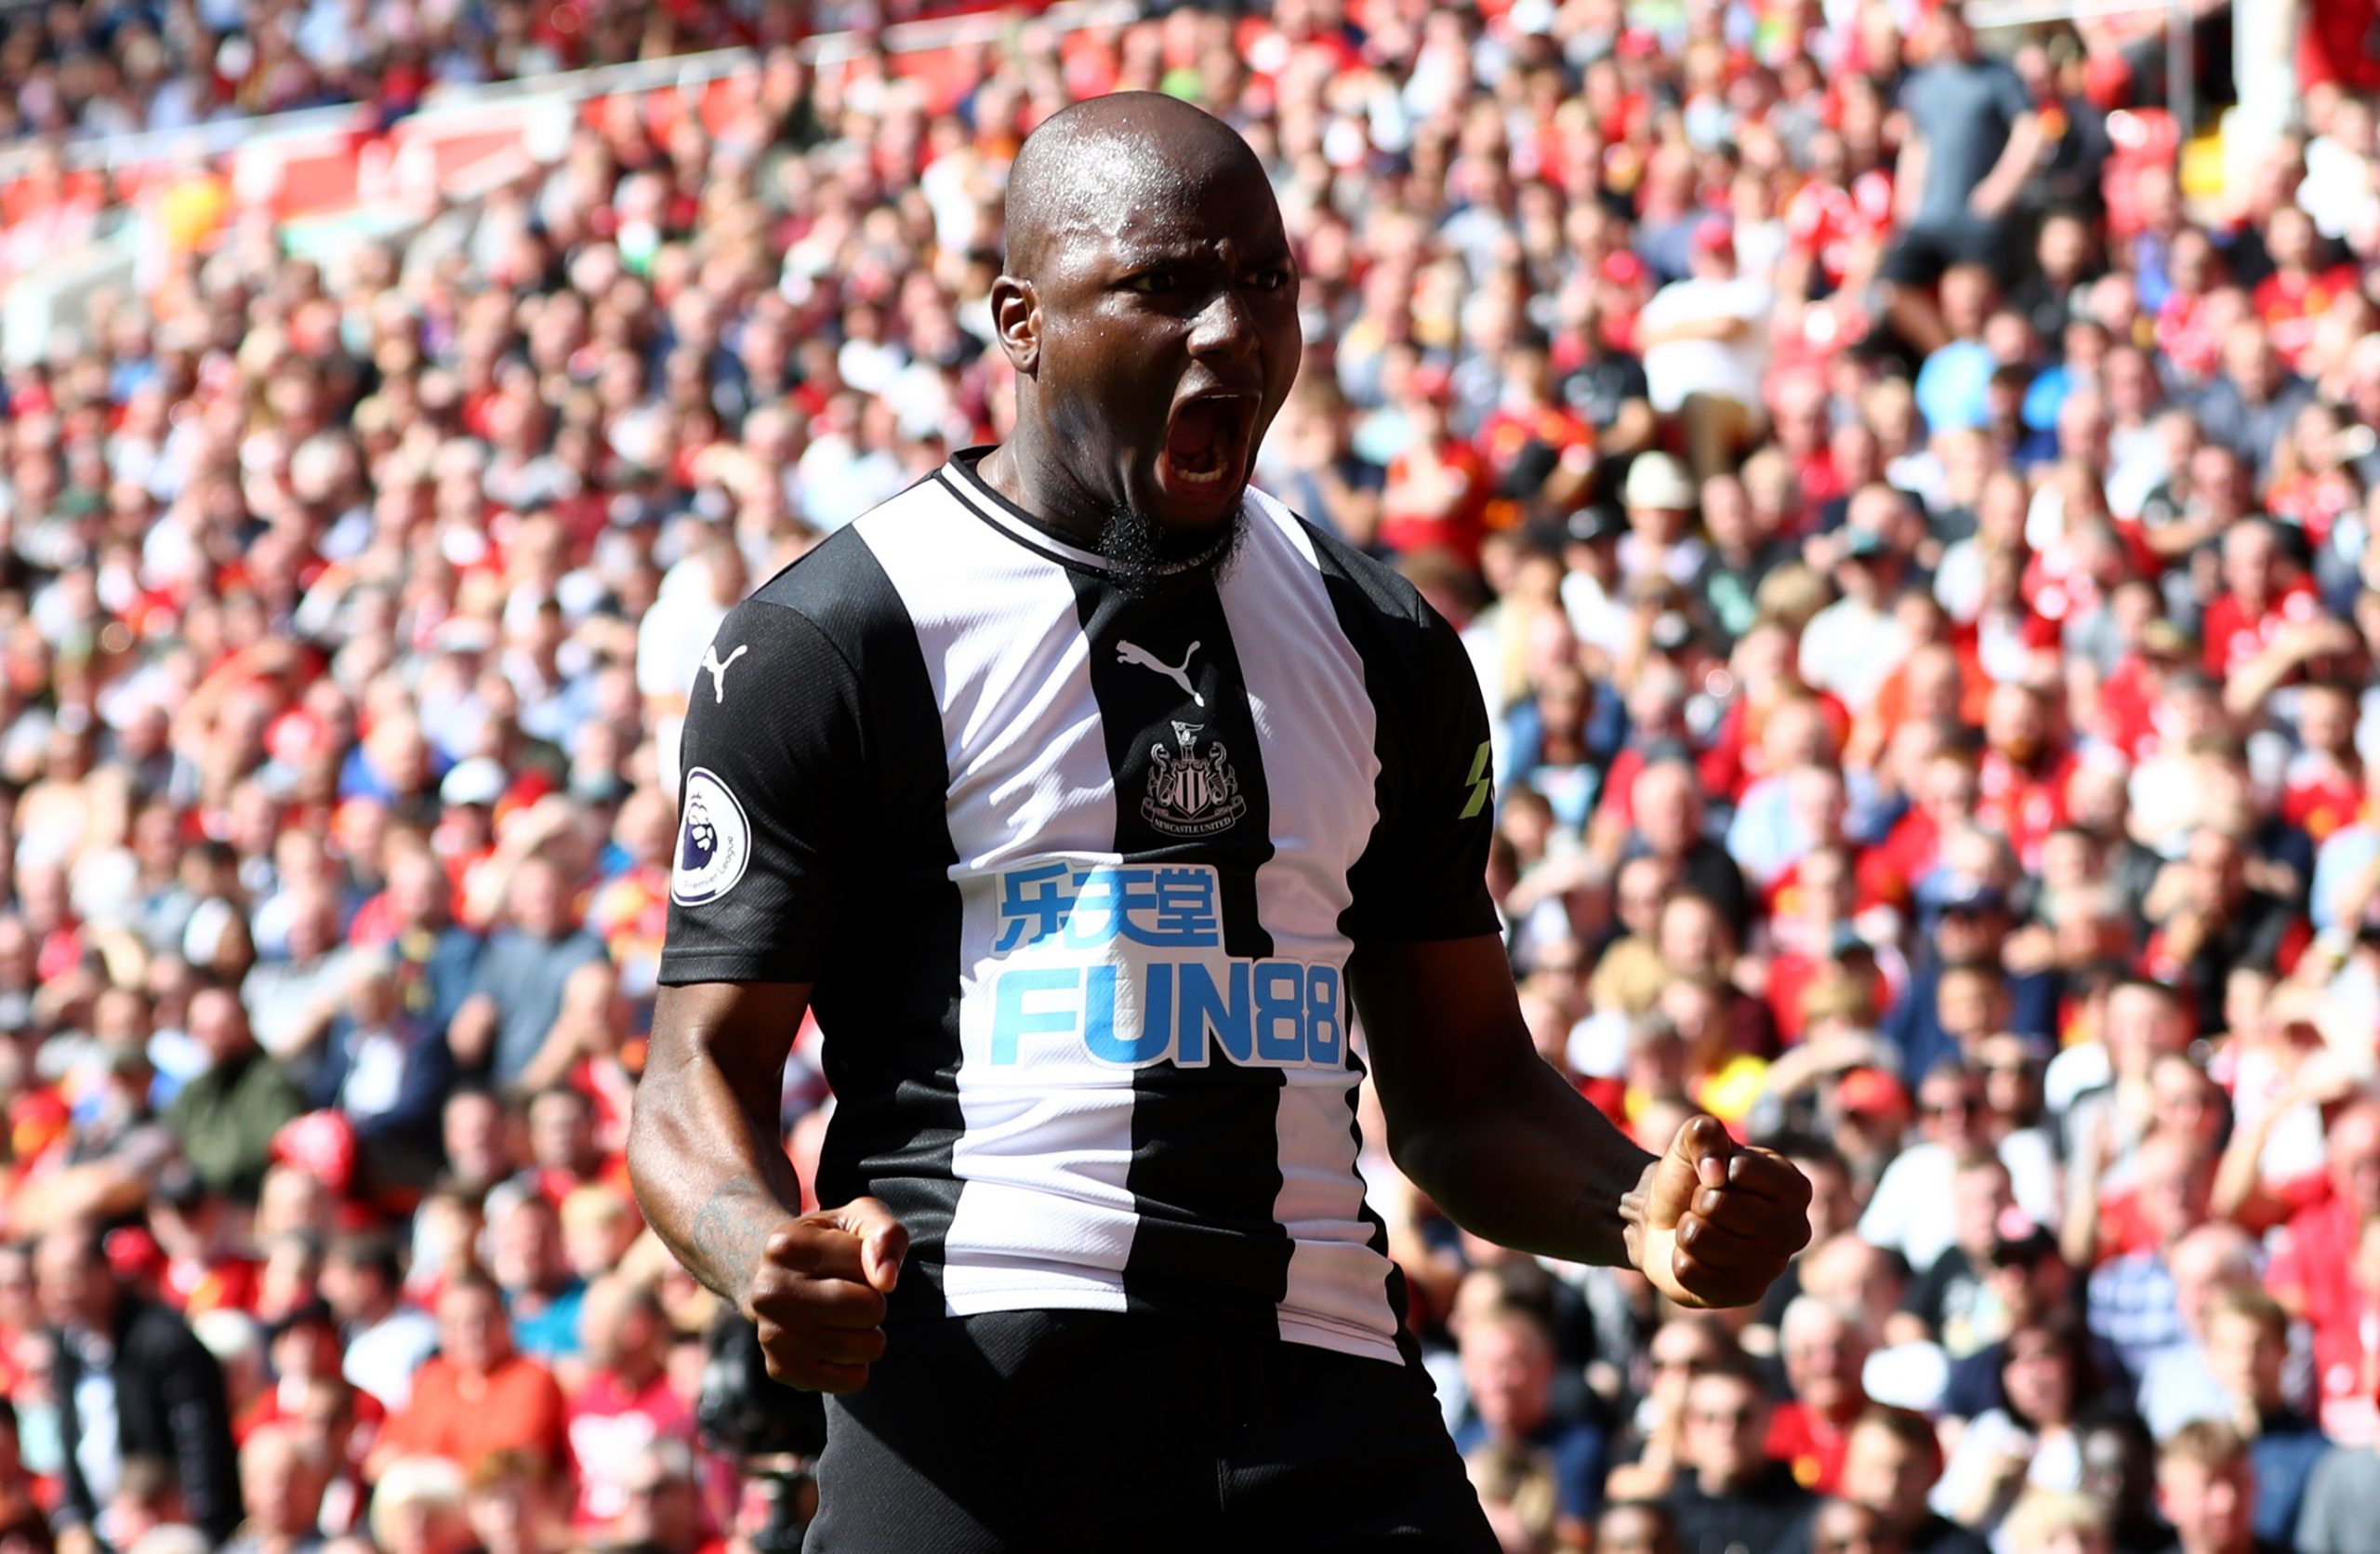 LIVERPOOL, ENGLAND - SEPTEMBER 14: Jetro Willems of Newcastle United celebrates after scoring his team's first goal during the Premier League match between Liverpool FC and Newcastle United at Anfield on September 14, 2019 in Liverpool, United Kingdom. (Photo by Michael Steele/Getty Images)